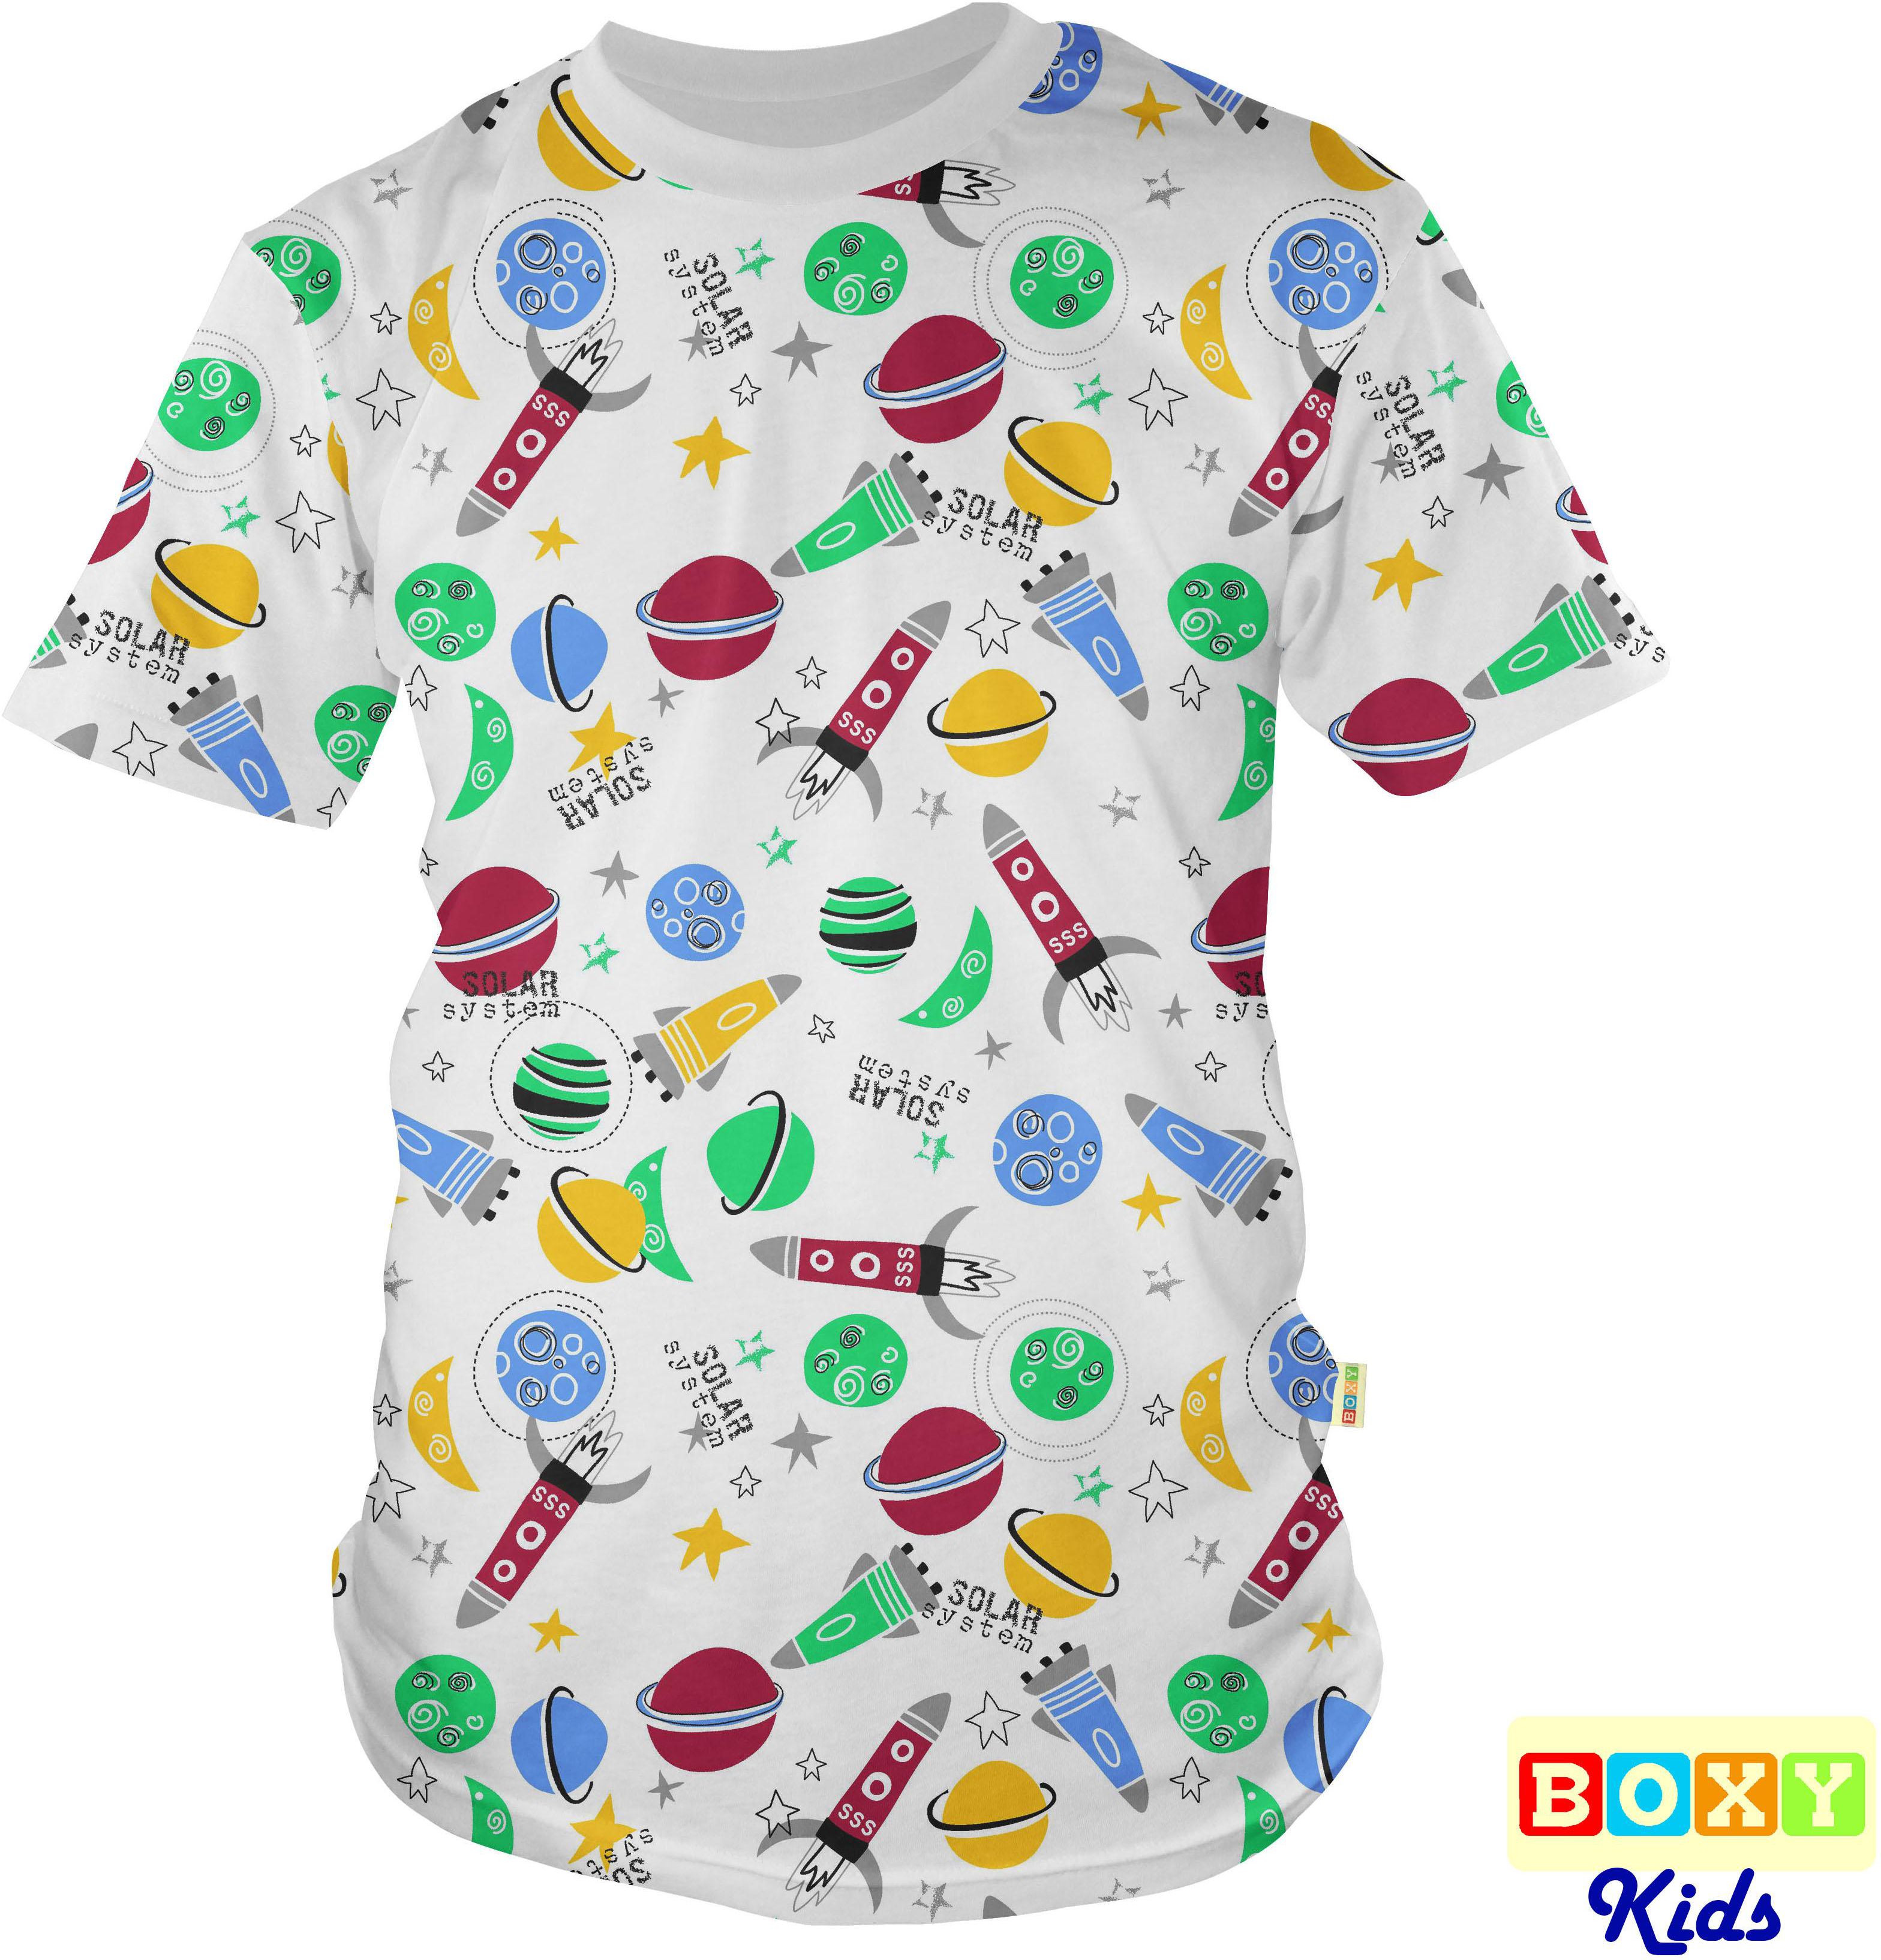 Boxy Kids Premium Cotton Graphic Tee - 4 Sizes (Flying To Space)